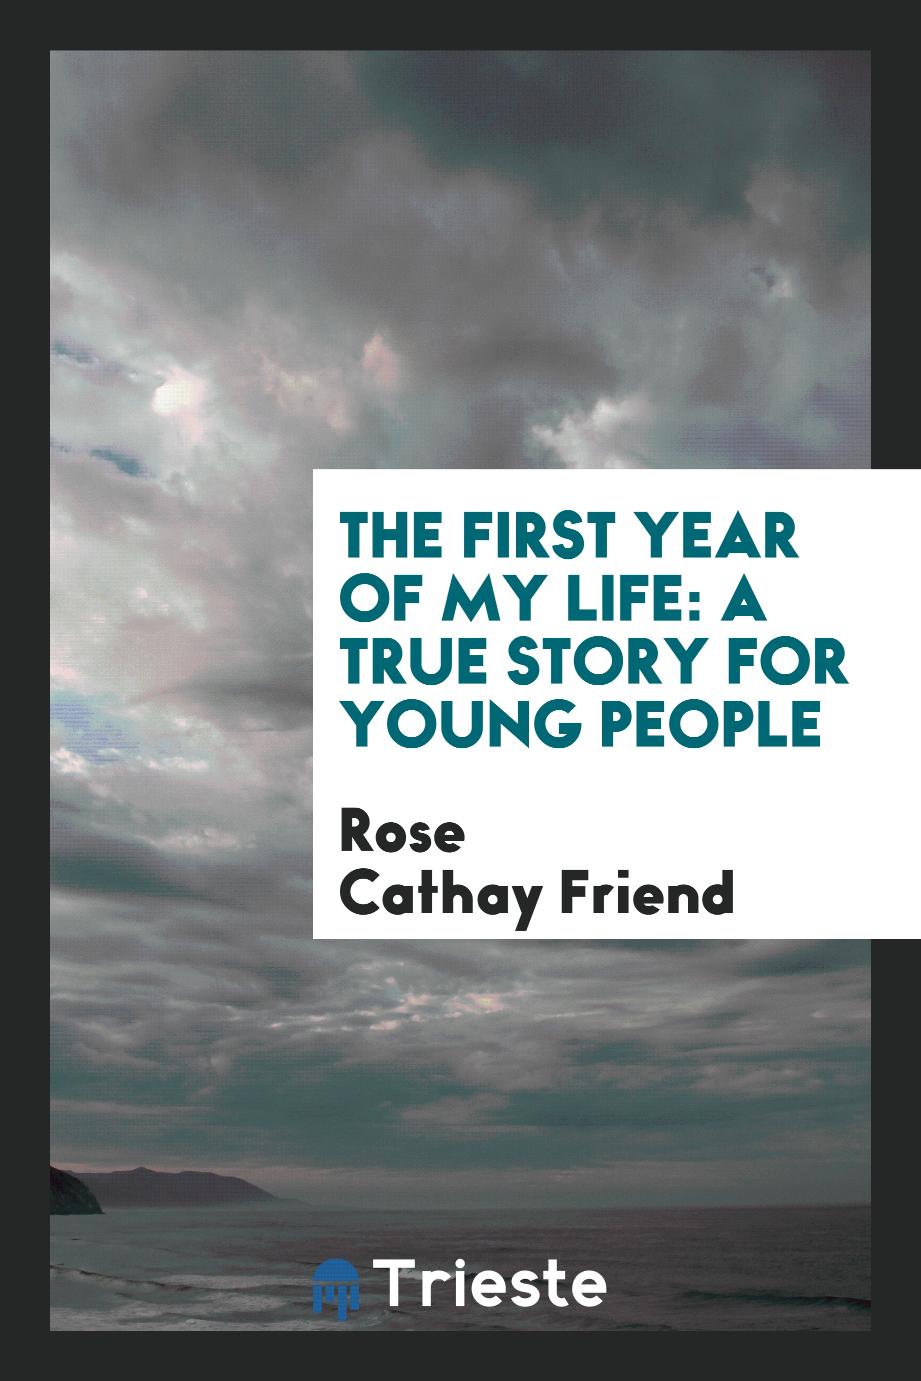 The First Year of My Life: A True Story for Young People